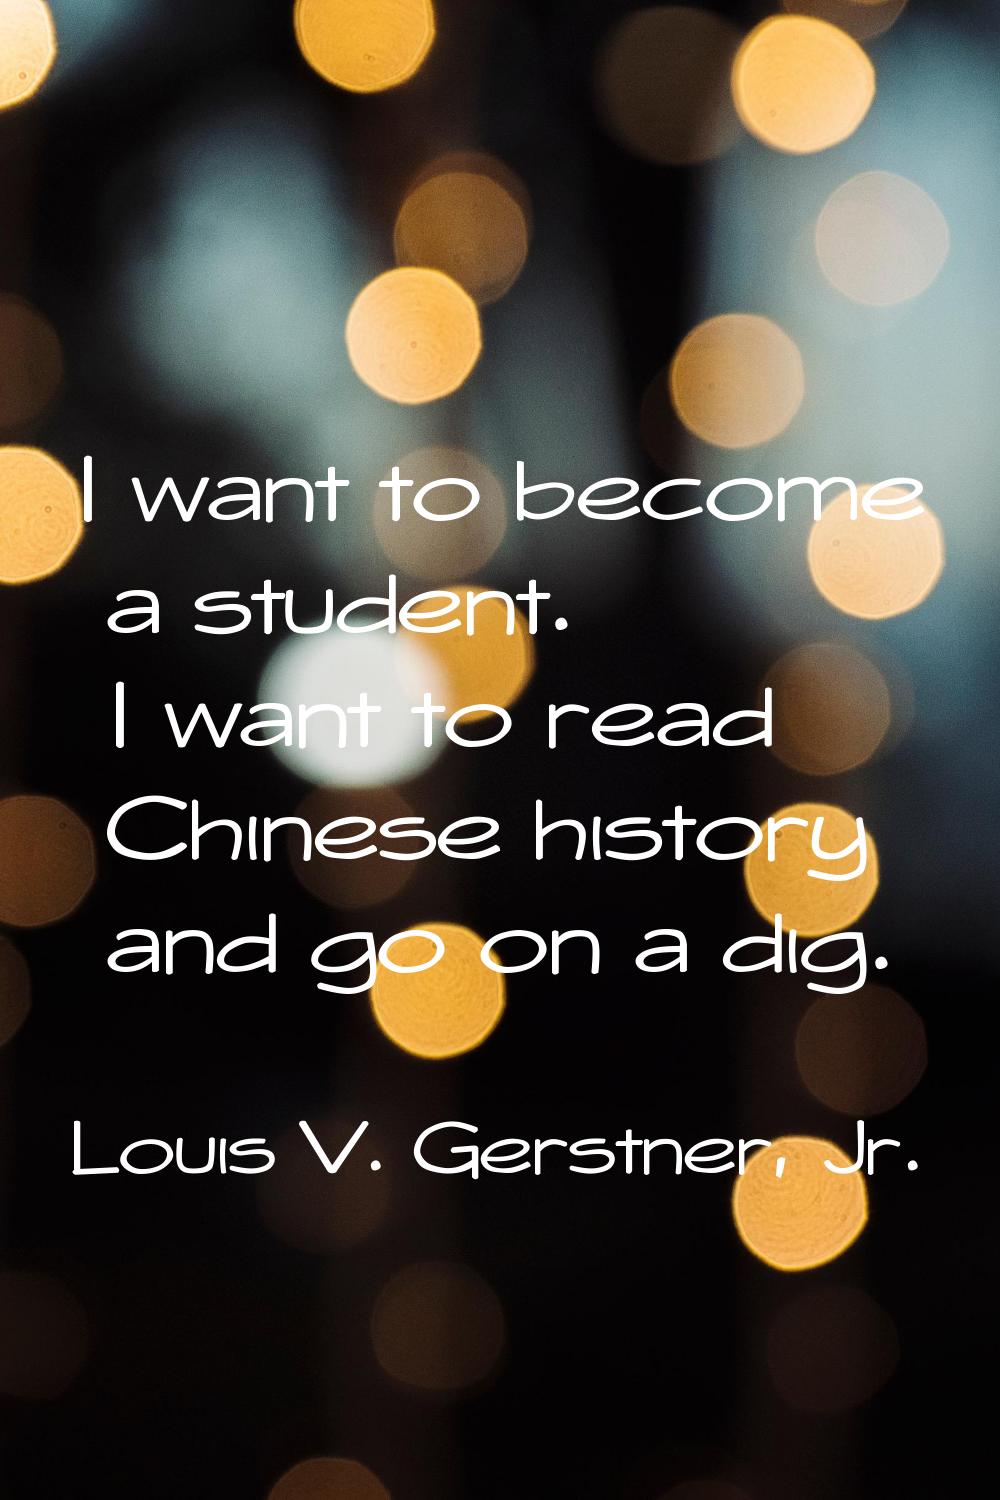 I want to become a student. I want to read Chinese history and go on a dig.